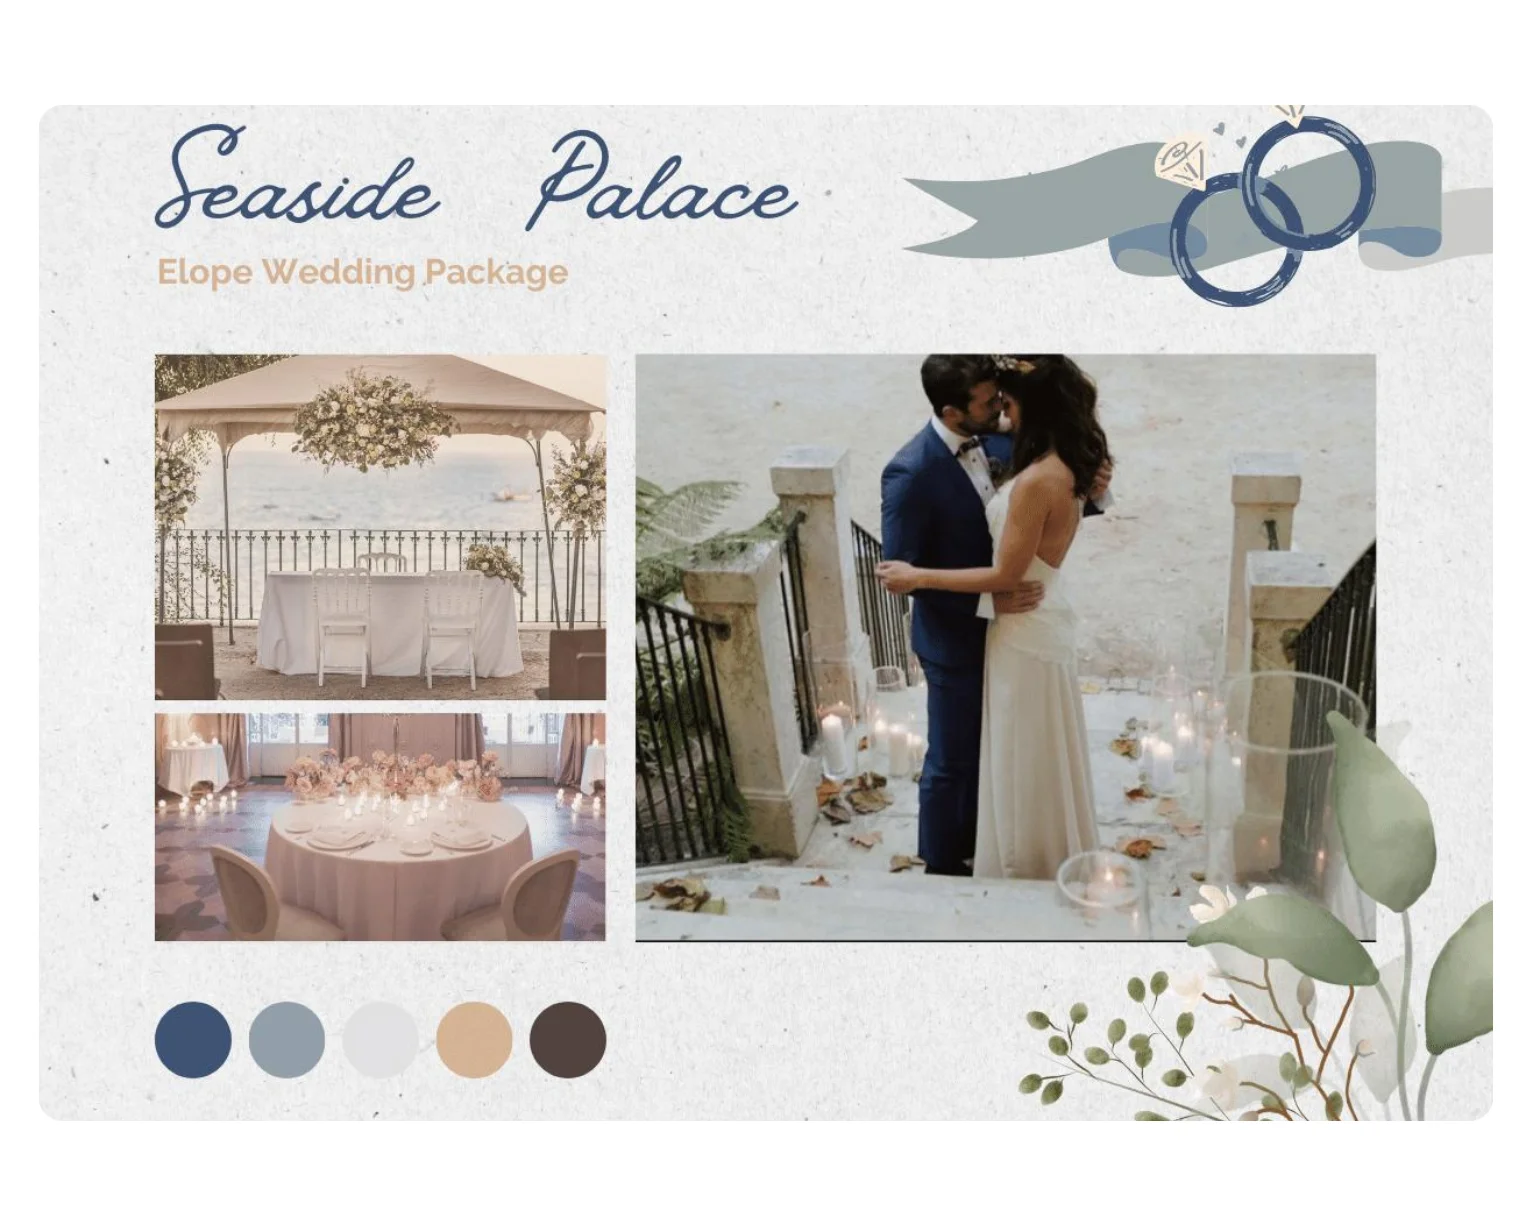 Portugal Elopement Packages